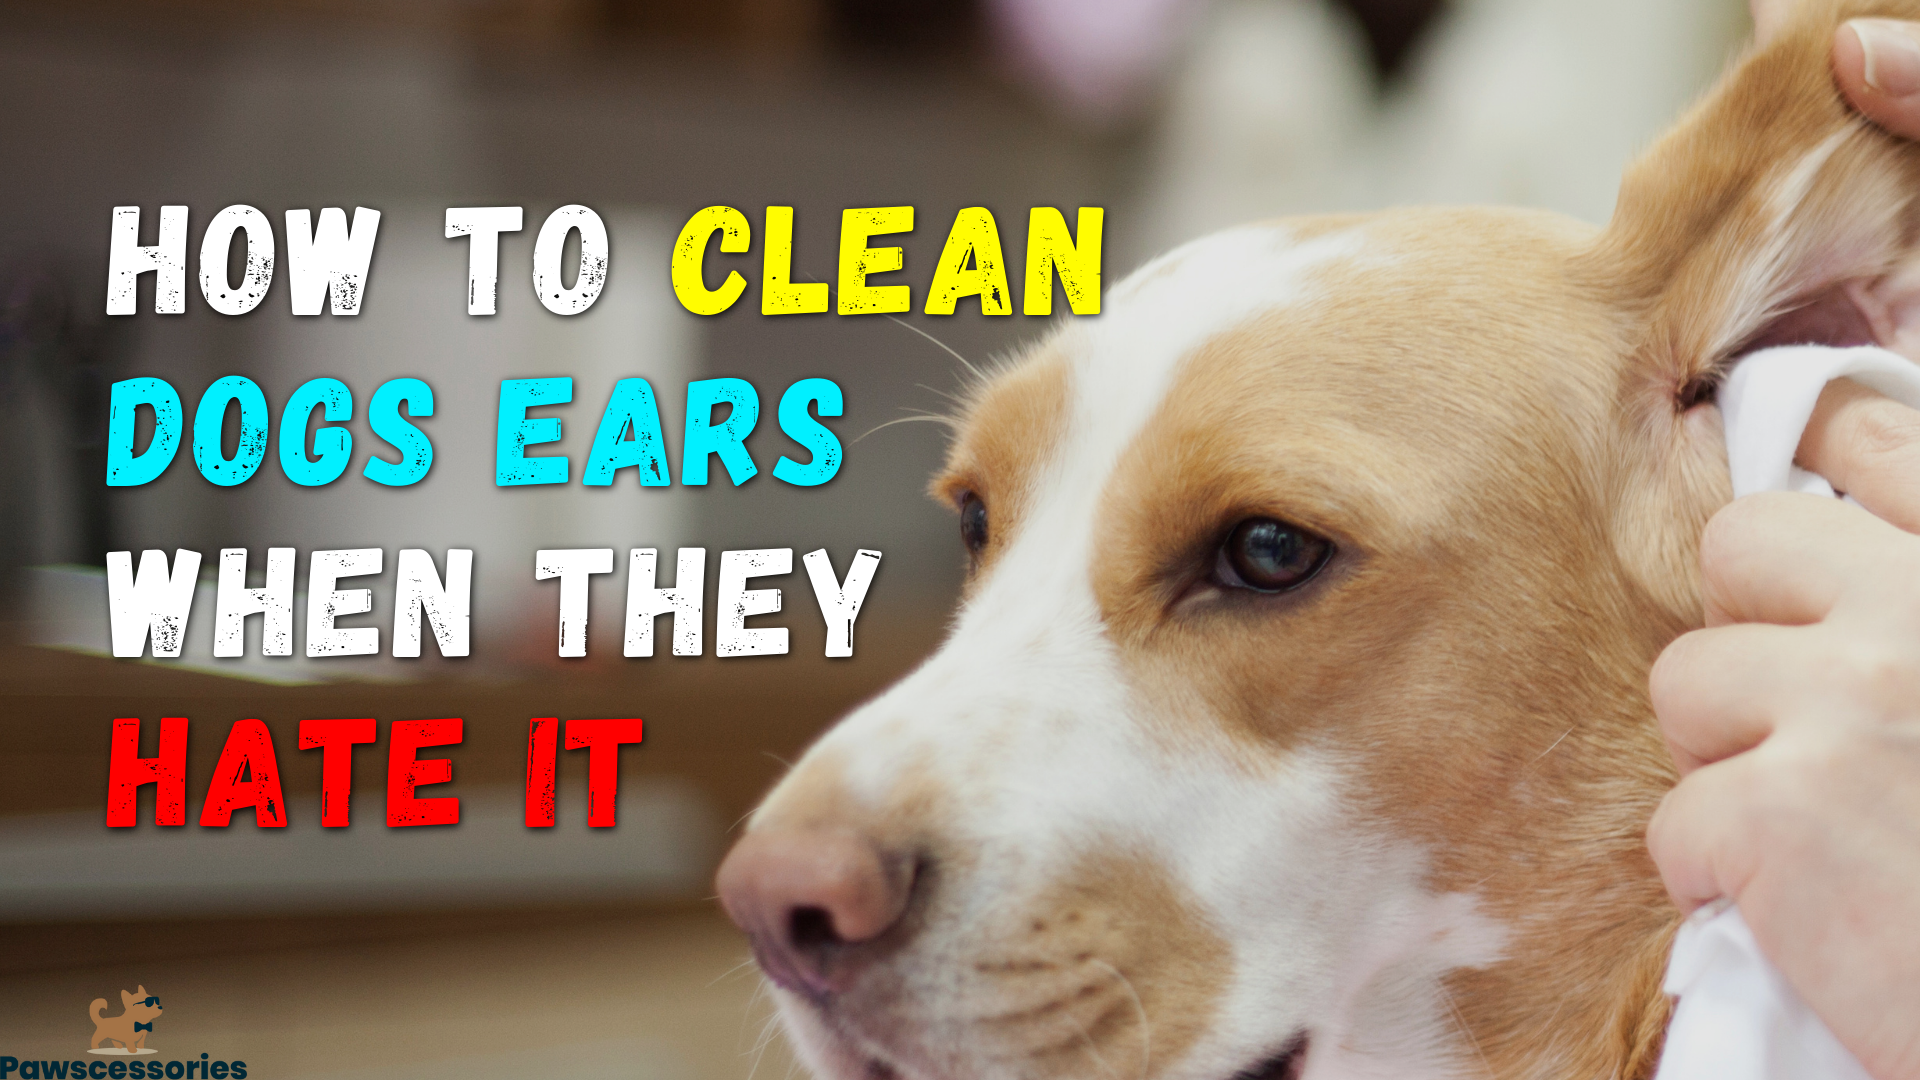 How To Clean Dog’s Ears When They Hate It: 9 Simple Steps